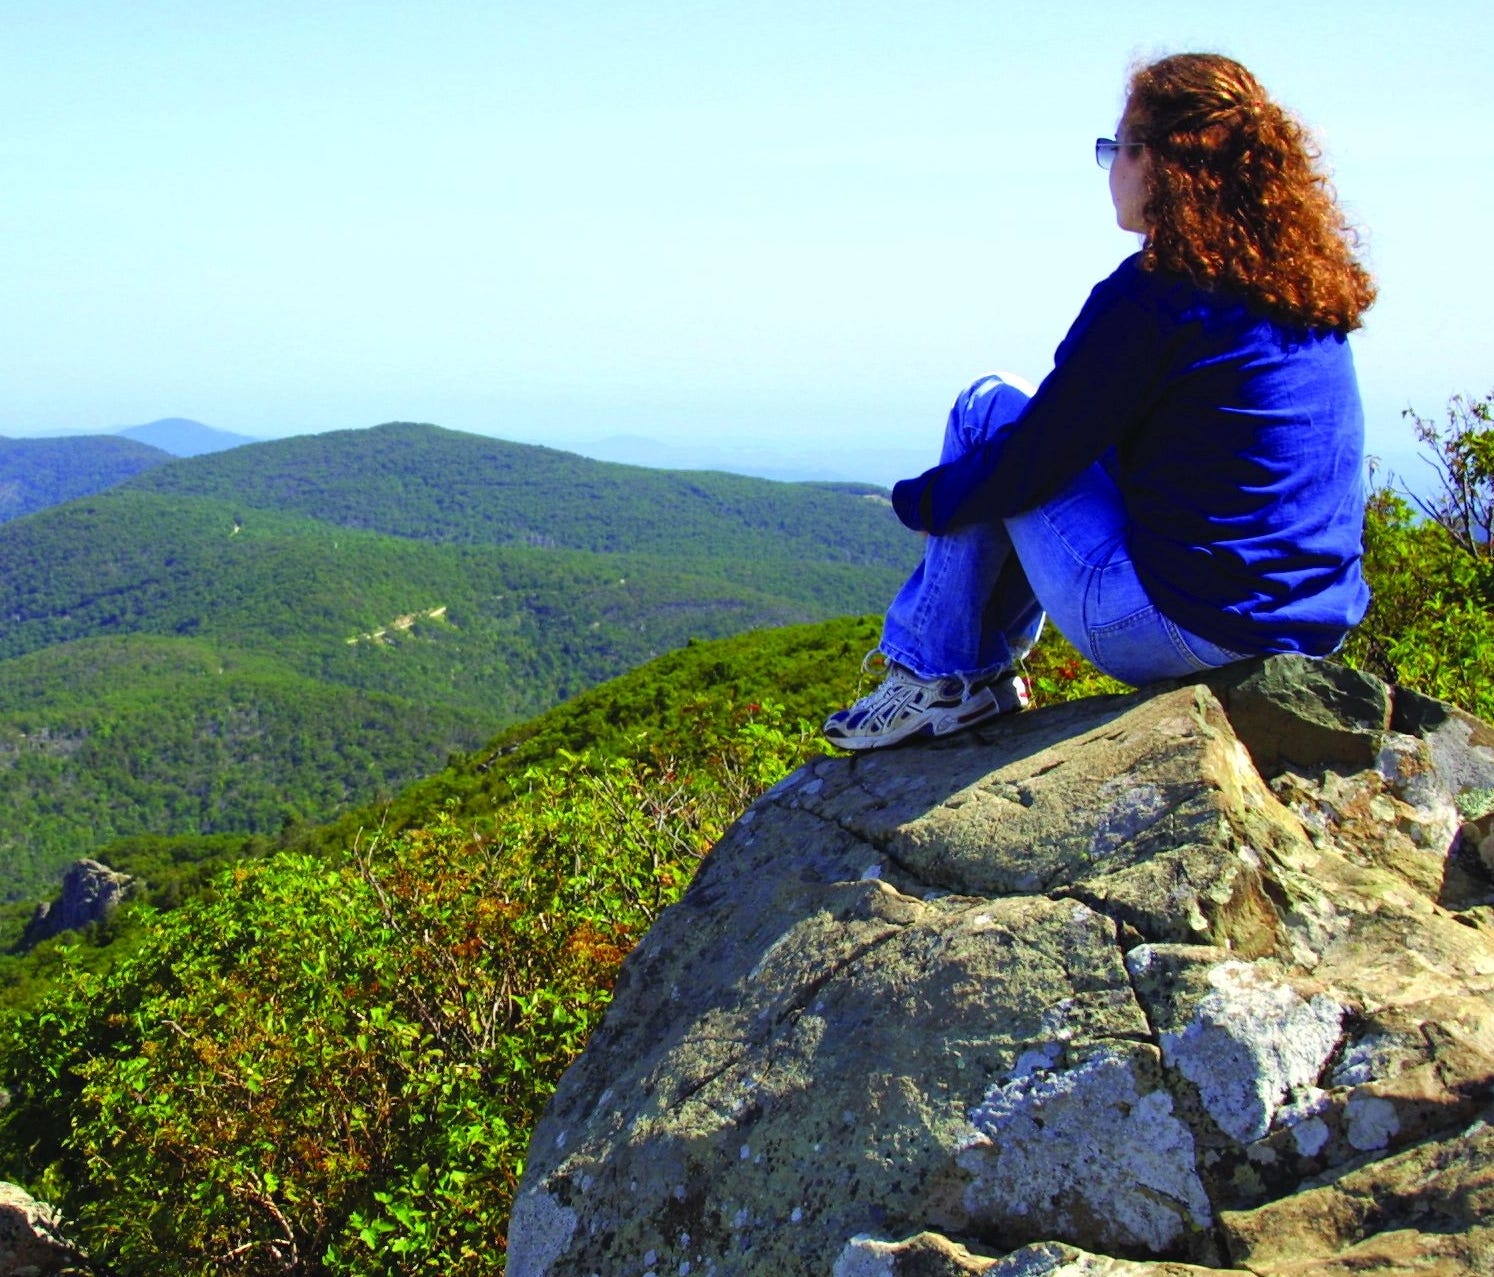 When it's time to escape from the hustle and bustle of the Beltway, drive 75 miles south to the 200,000 protected acres of land that comprise Shenandoah National Park for some peace and quiet.